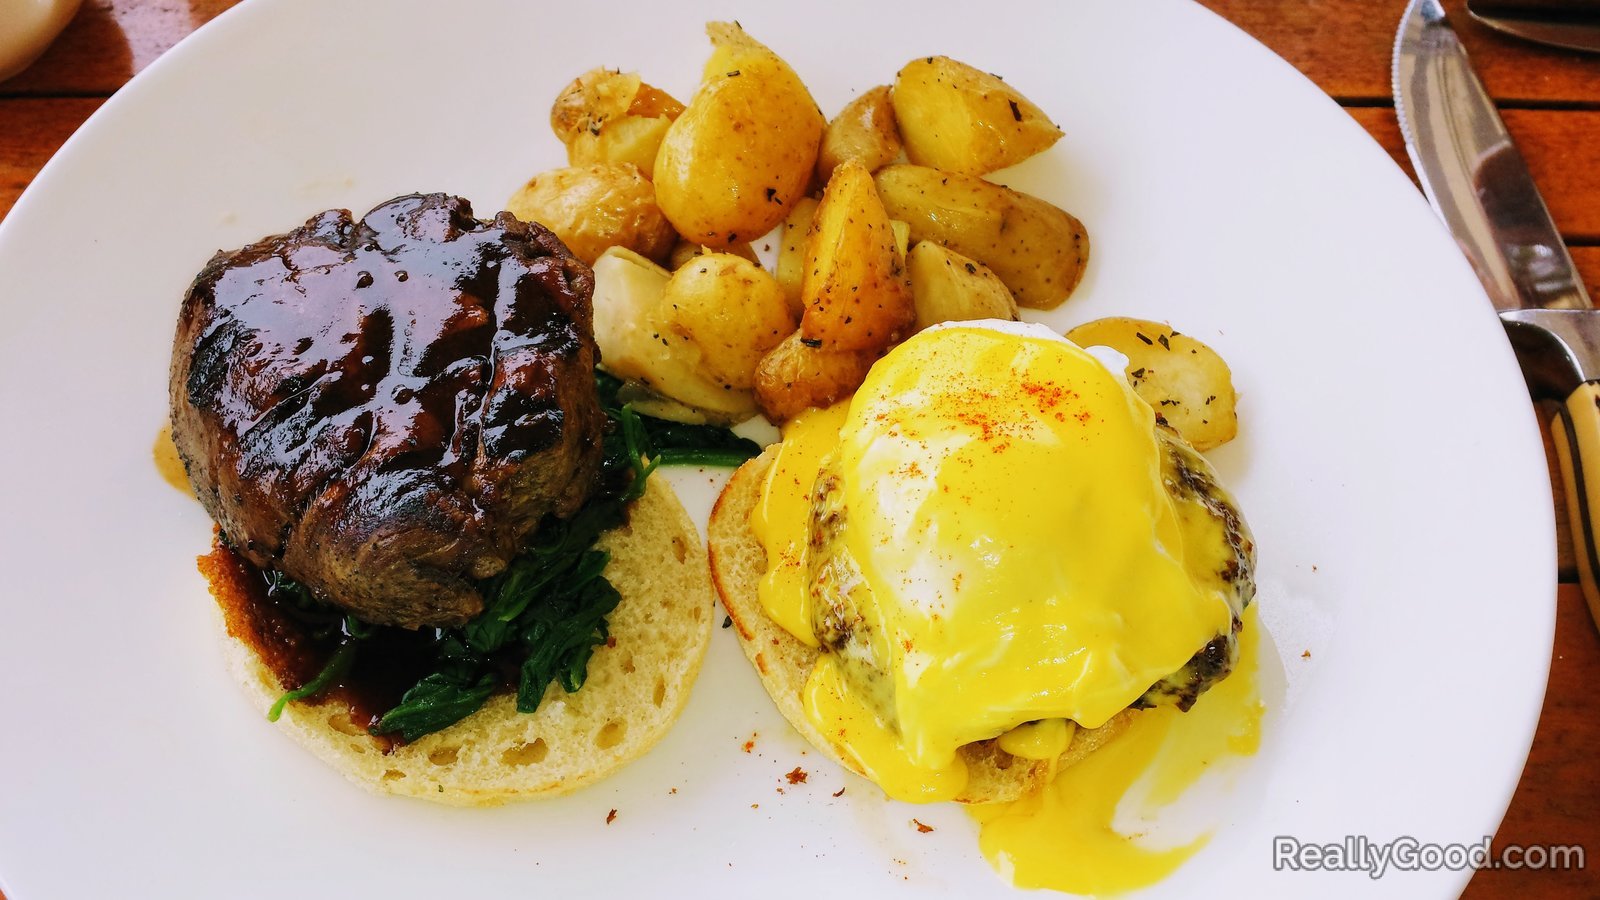 Steak and eggs benedict with potatoes